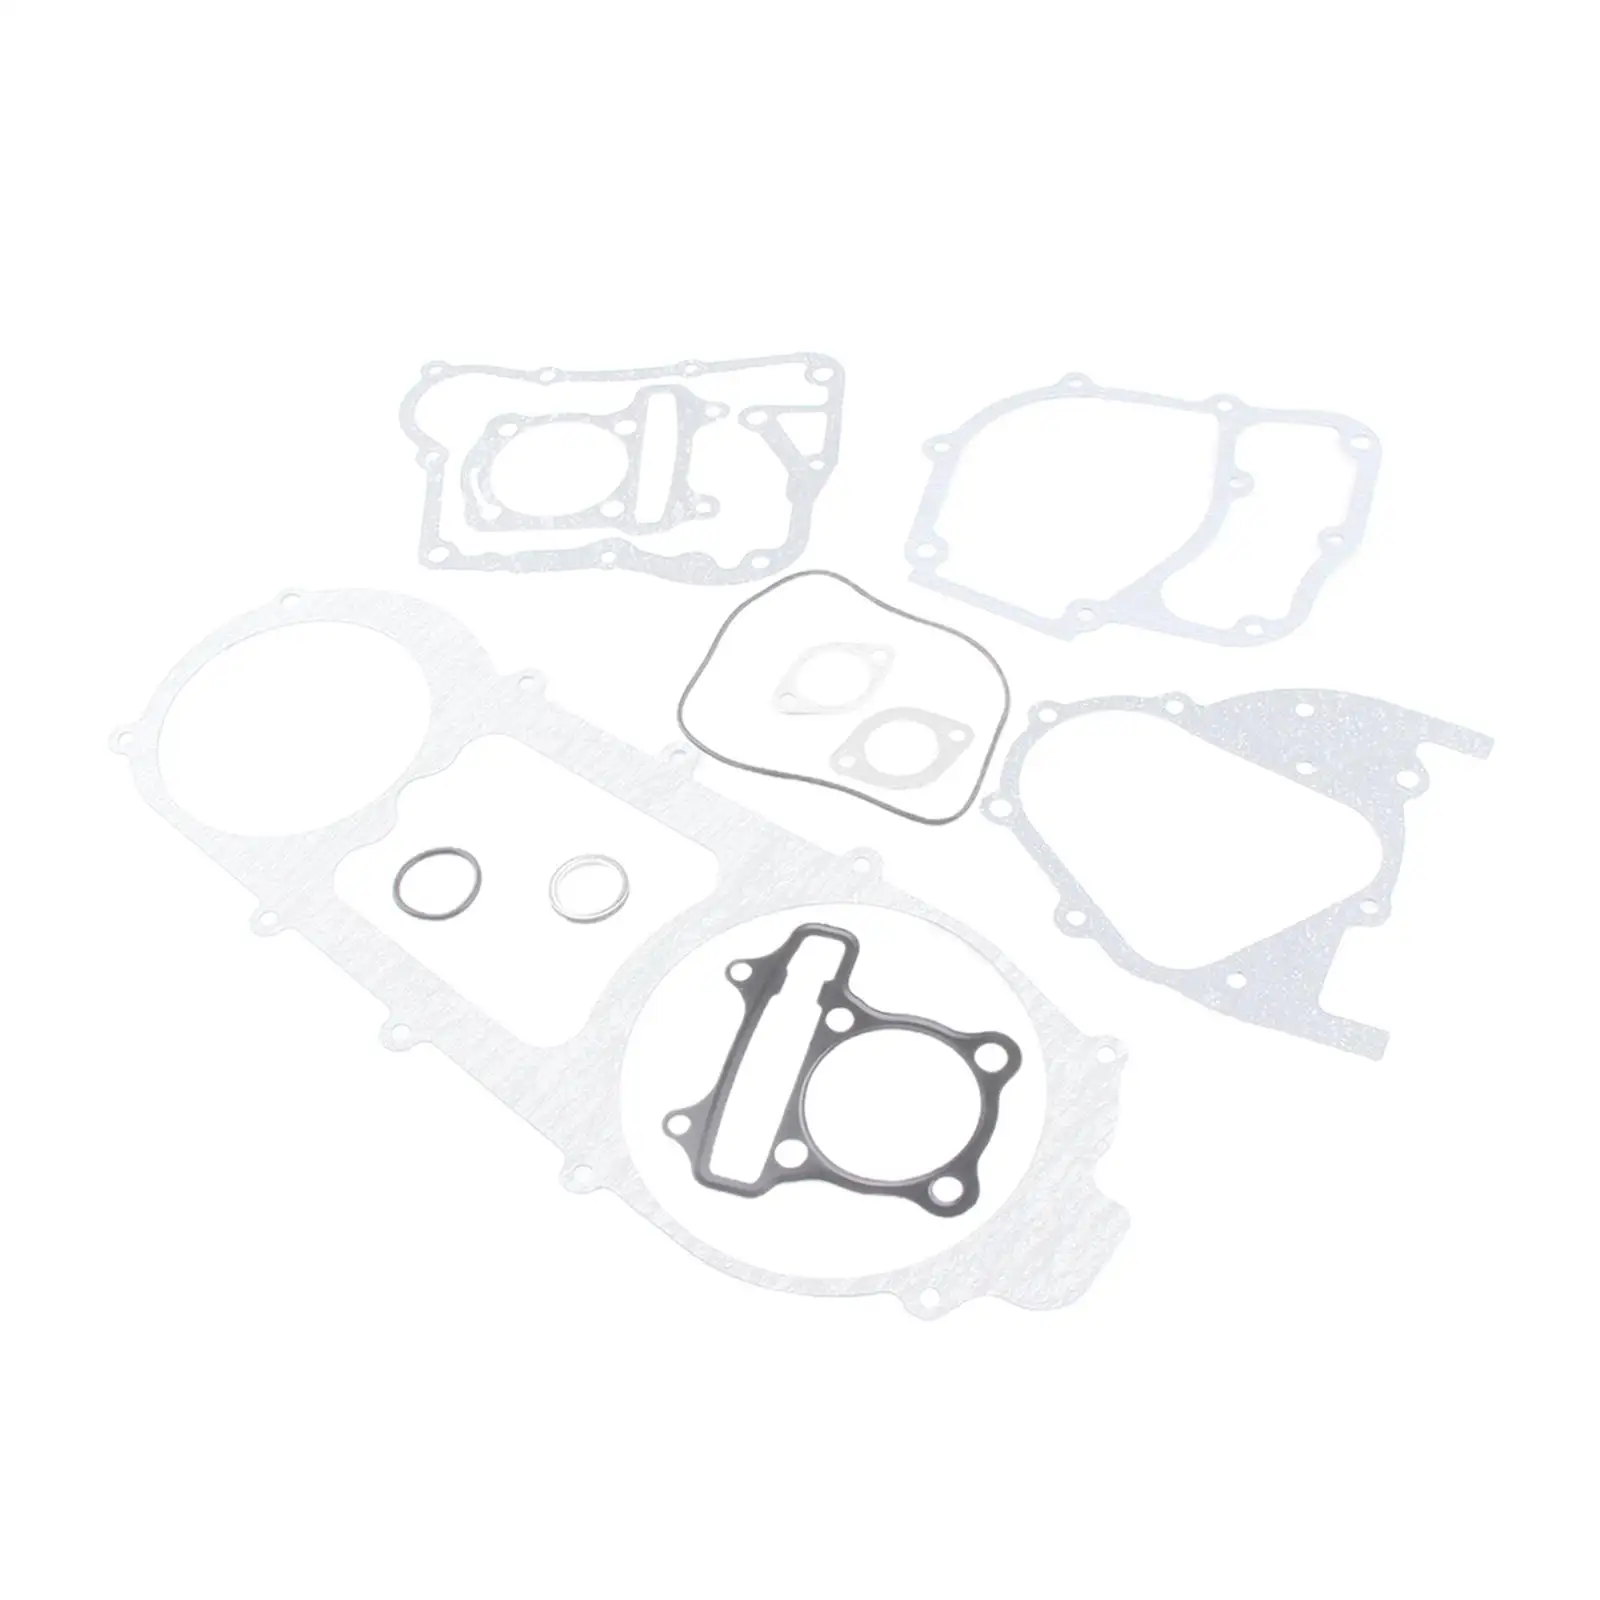  Engine Head Gasket Set for GY6 150cc Moped Scooters  Quadfits most Chinese brands